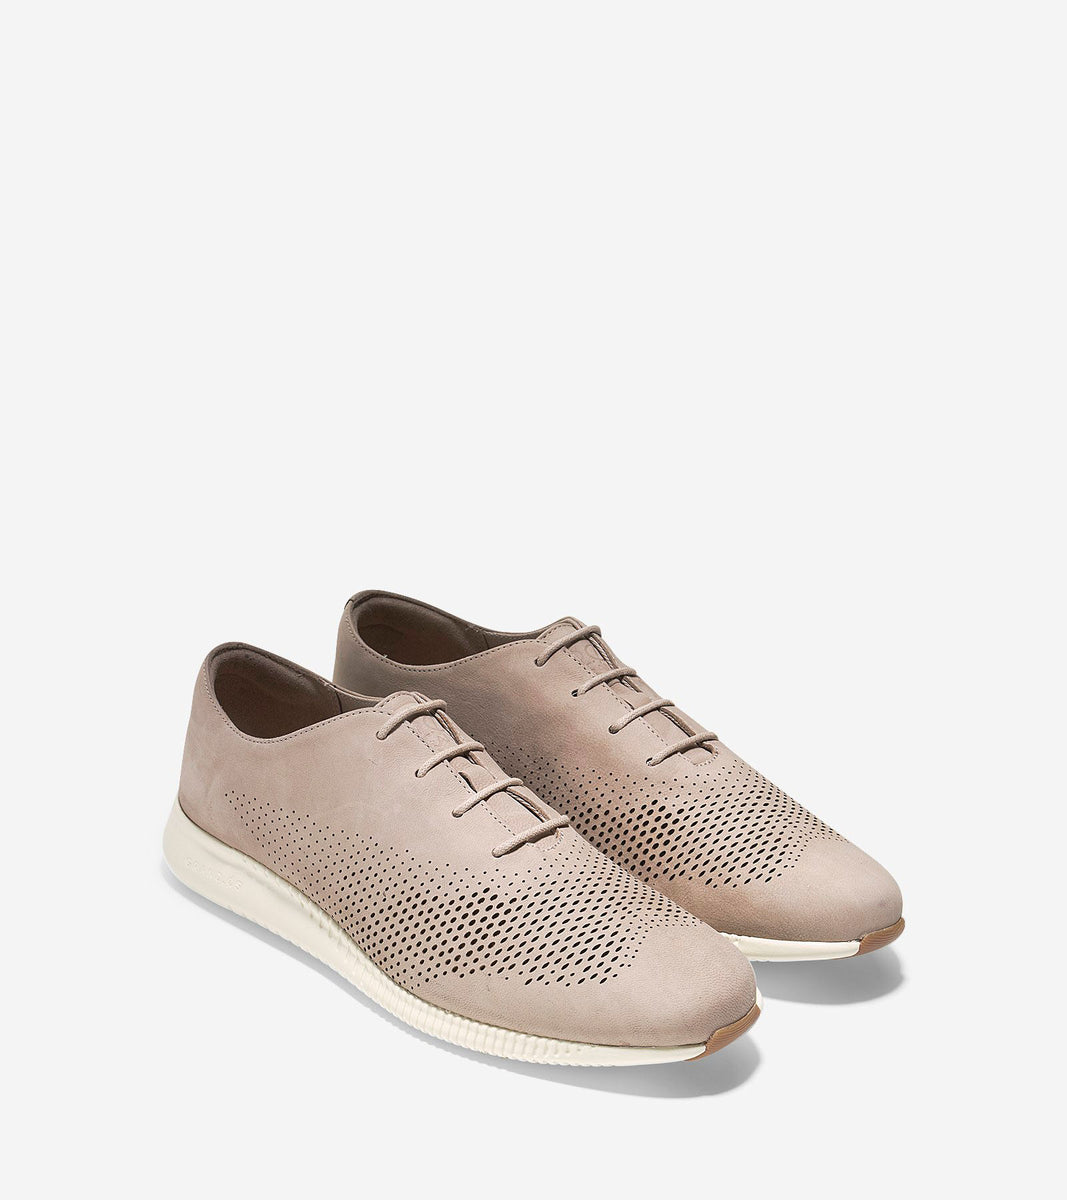 ColeHaan-2.ZERØGRAND Laser Wingtip Oxford-w05420-Simply Taupe Nubuck-ivory